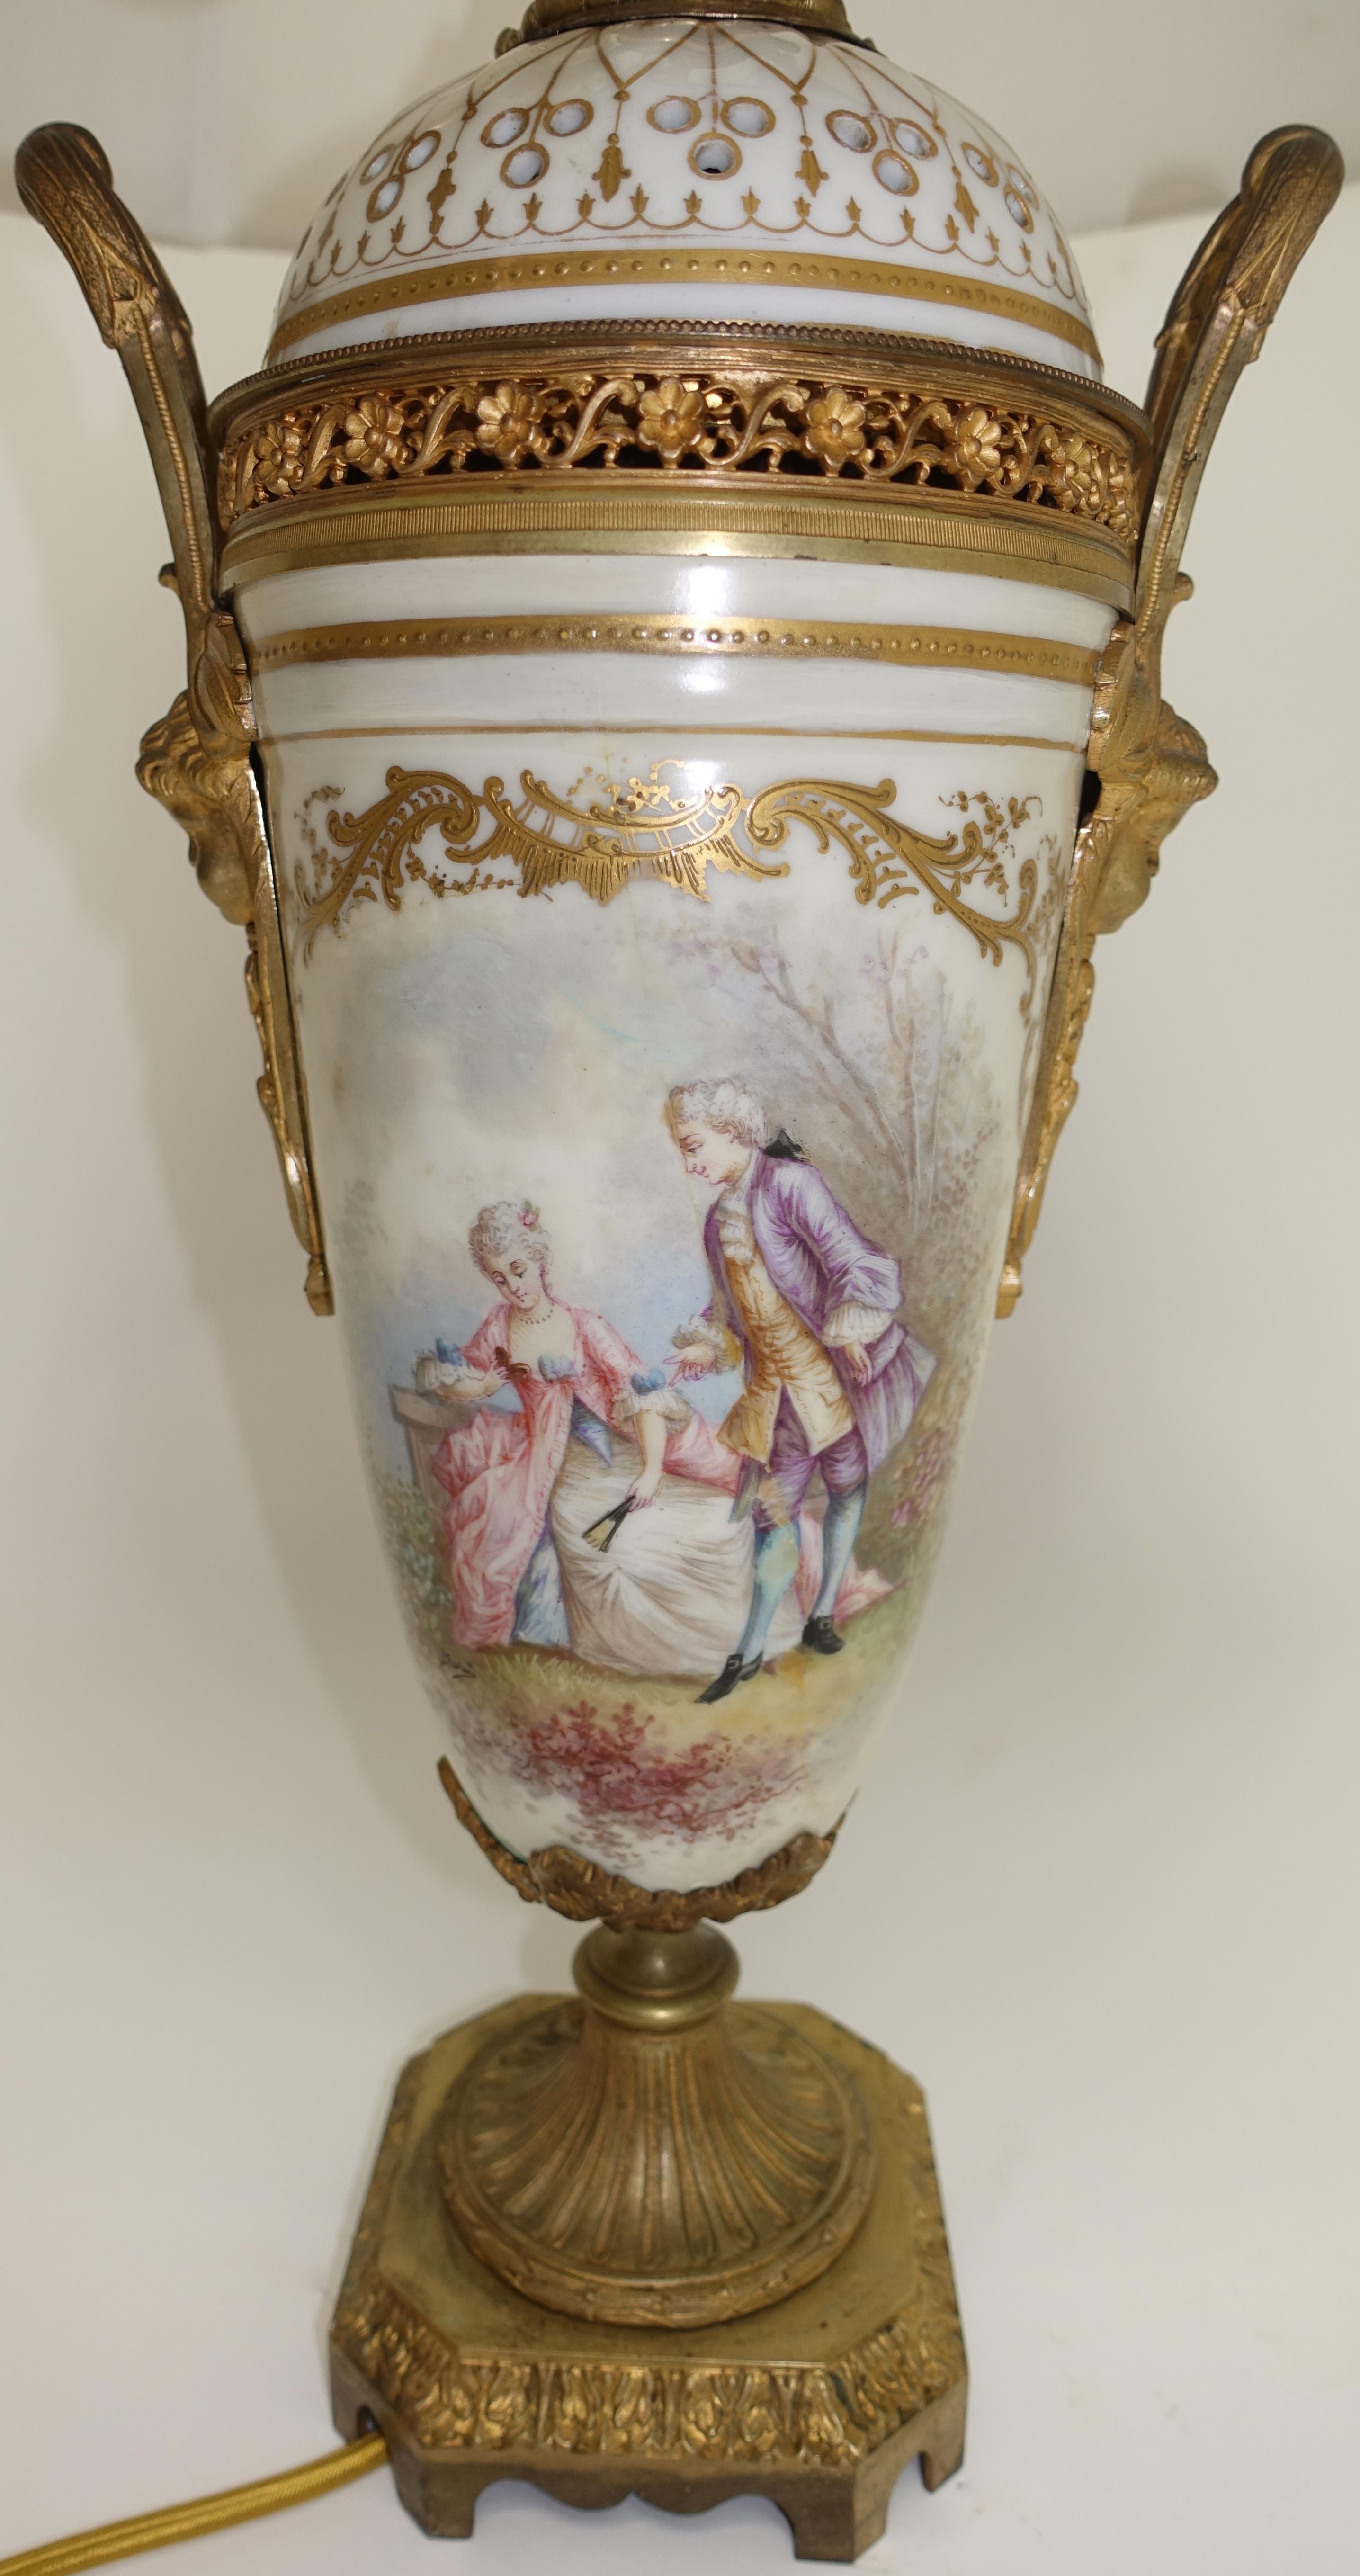 19th Century Sèvres Porcelain and Ormolu Covered Urn/Lamp 1